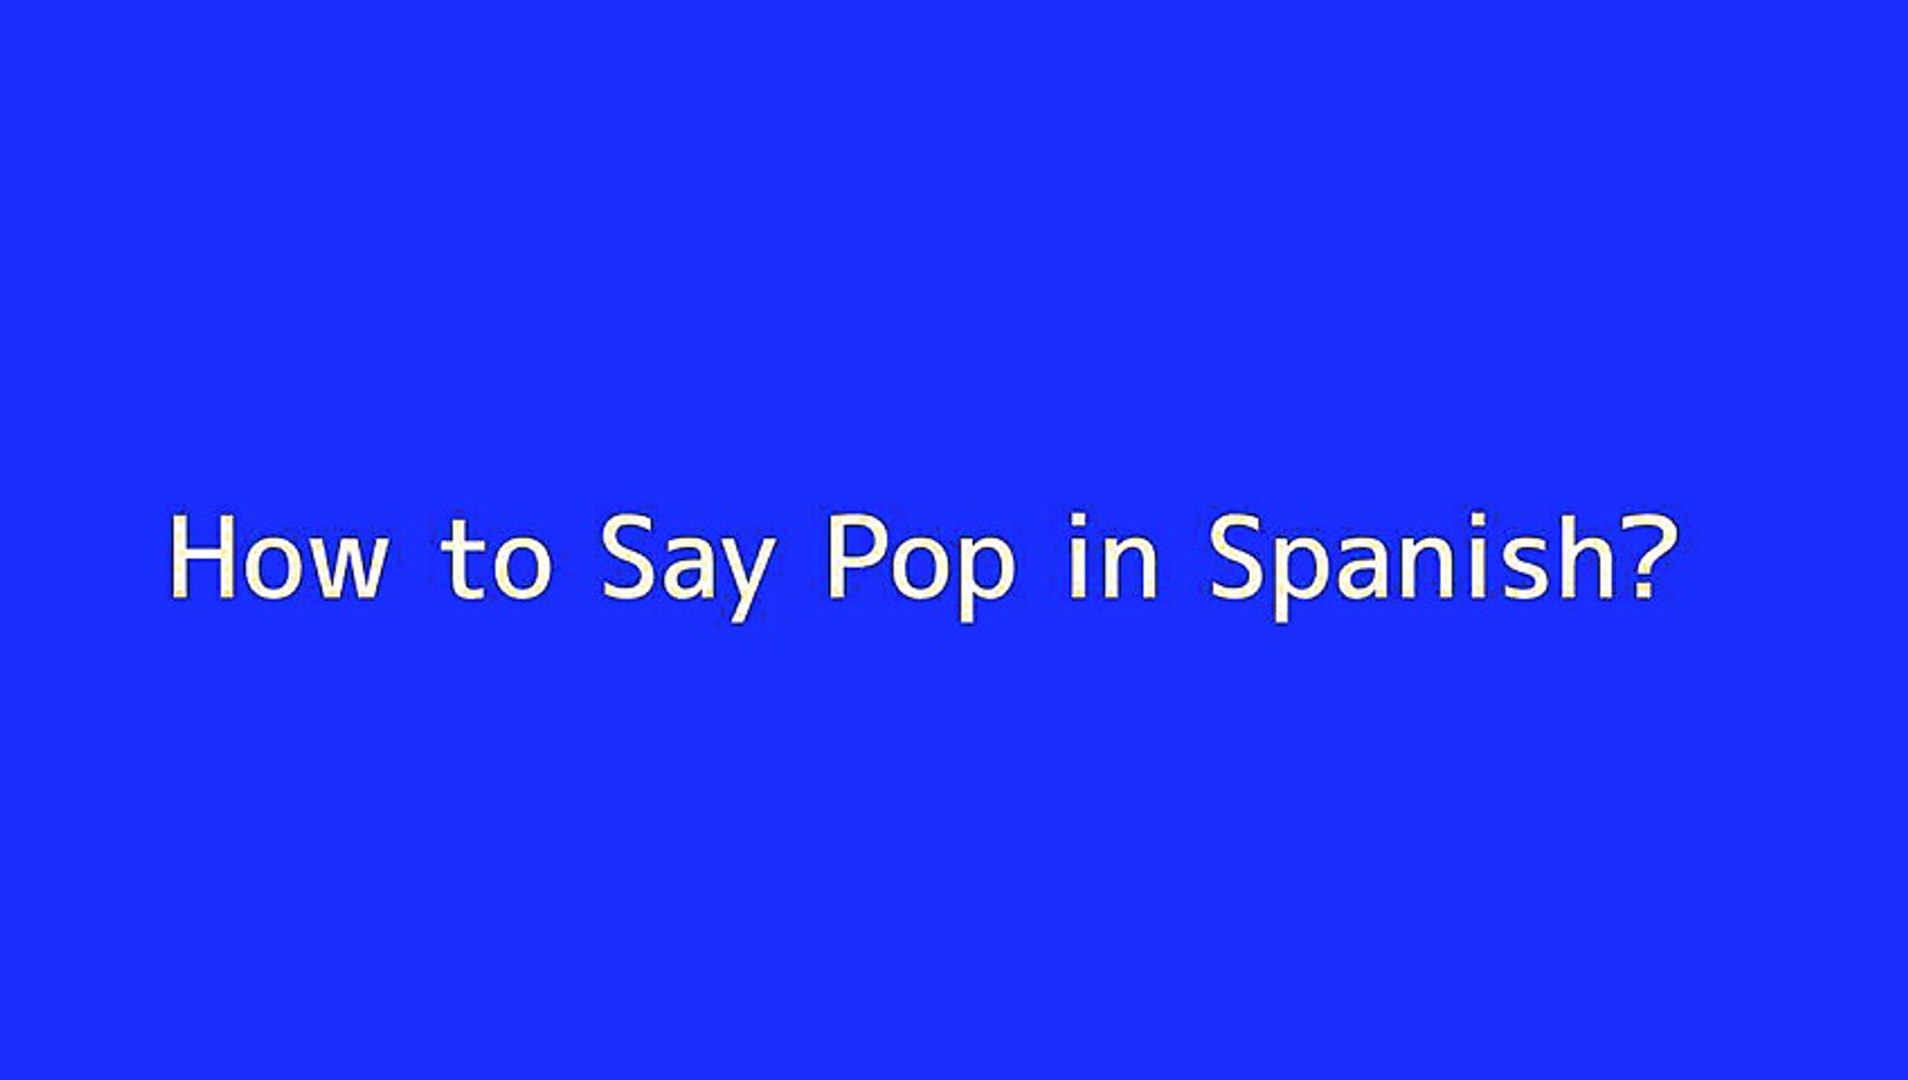 How to say Pop in Spanish - Vidéo Dailymotion